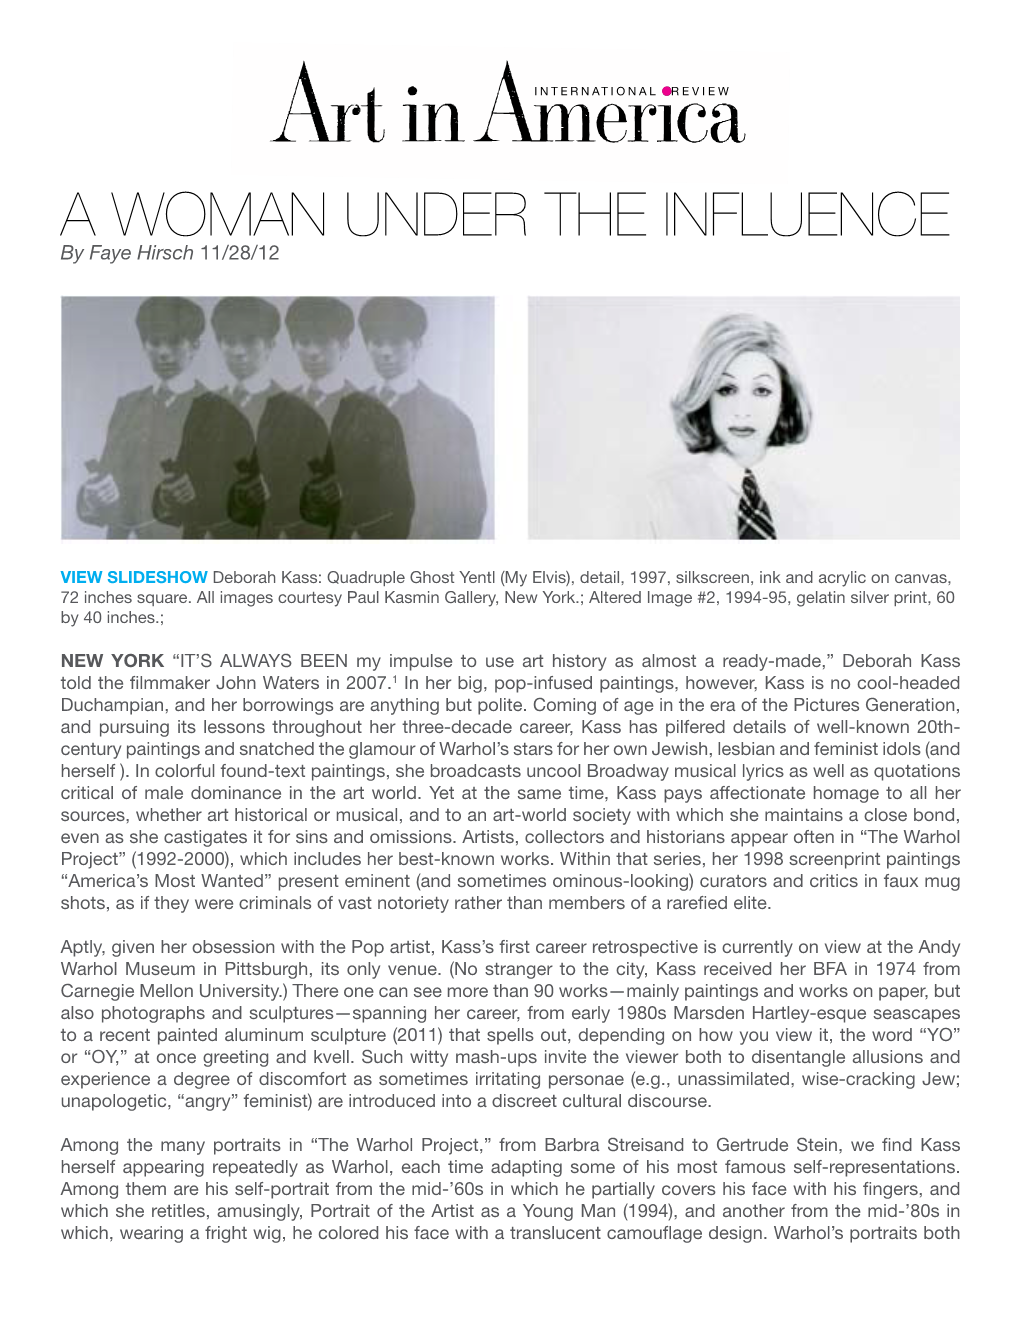 A WOMAN UNDER the INFLUENCE by Faye Hirsch 11/28/12